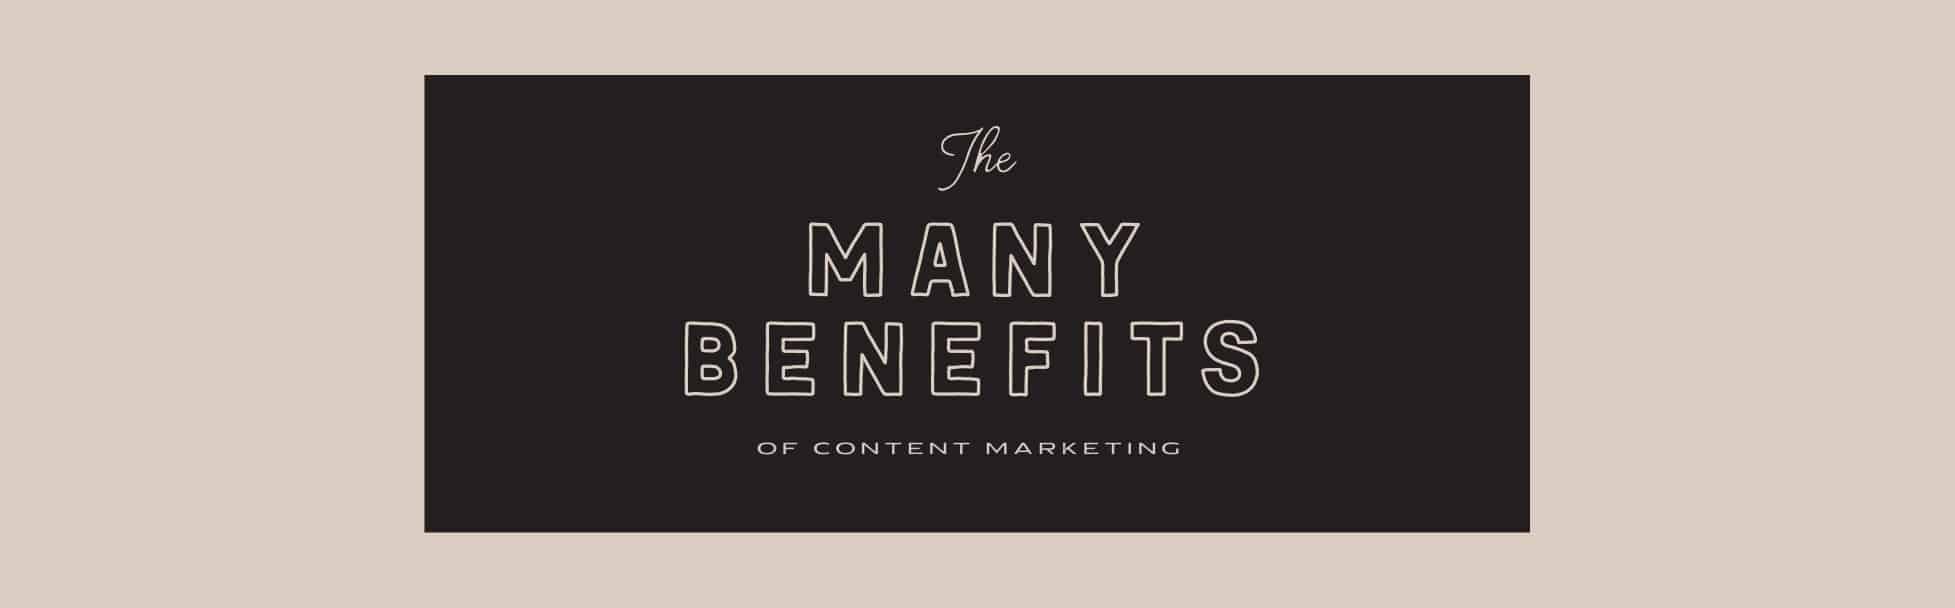 The Many Benefits of Content Marketing